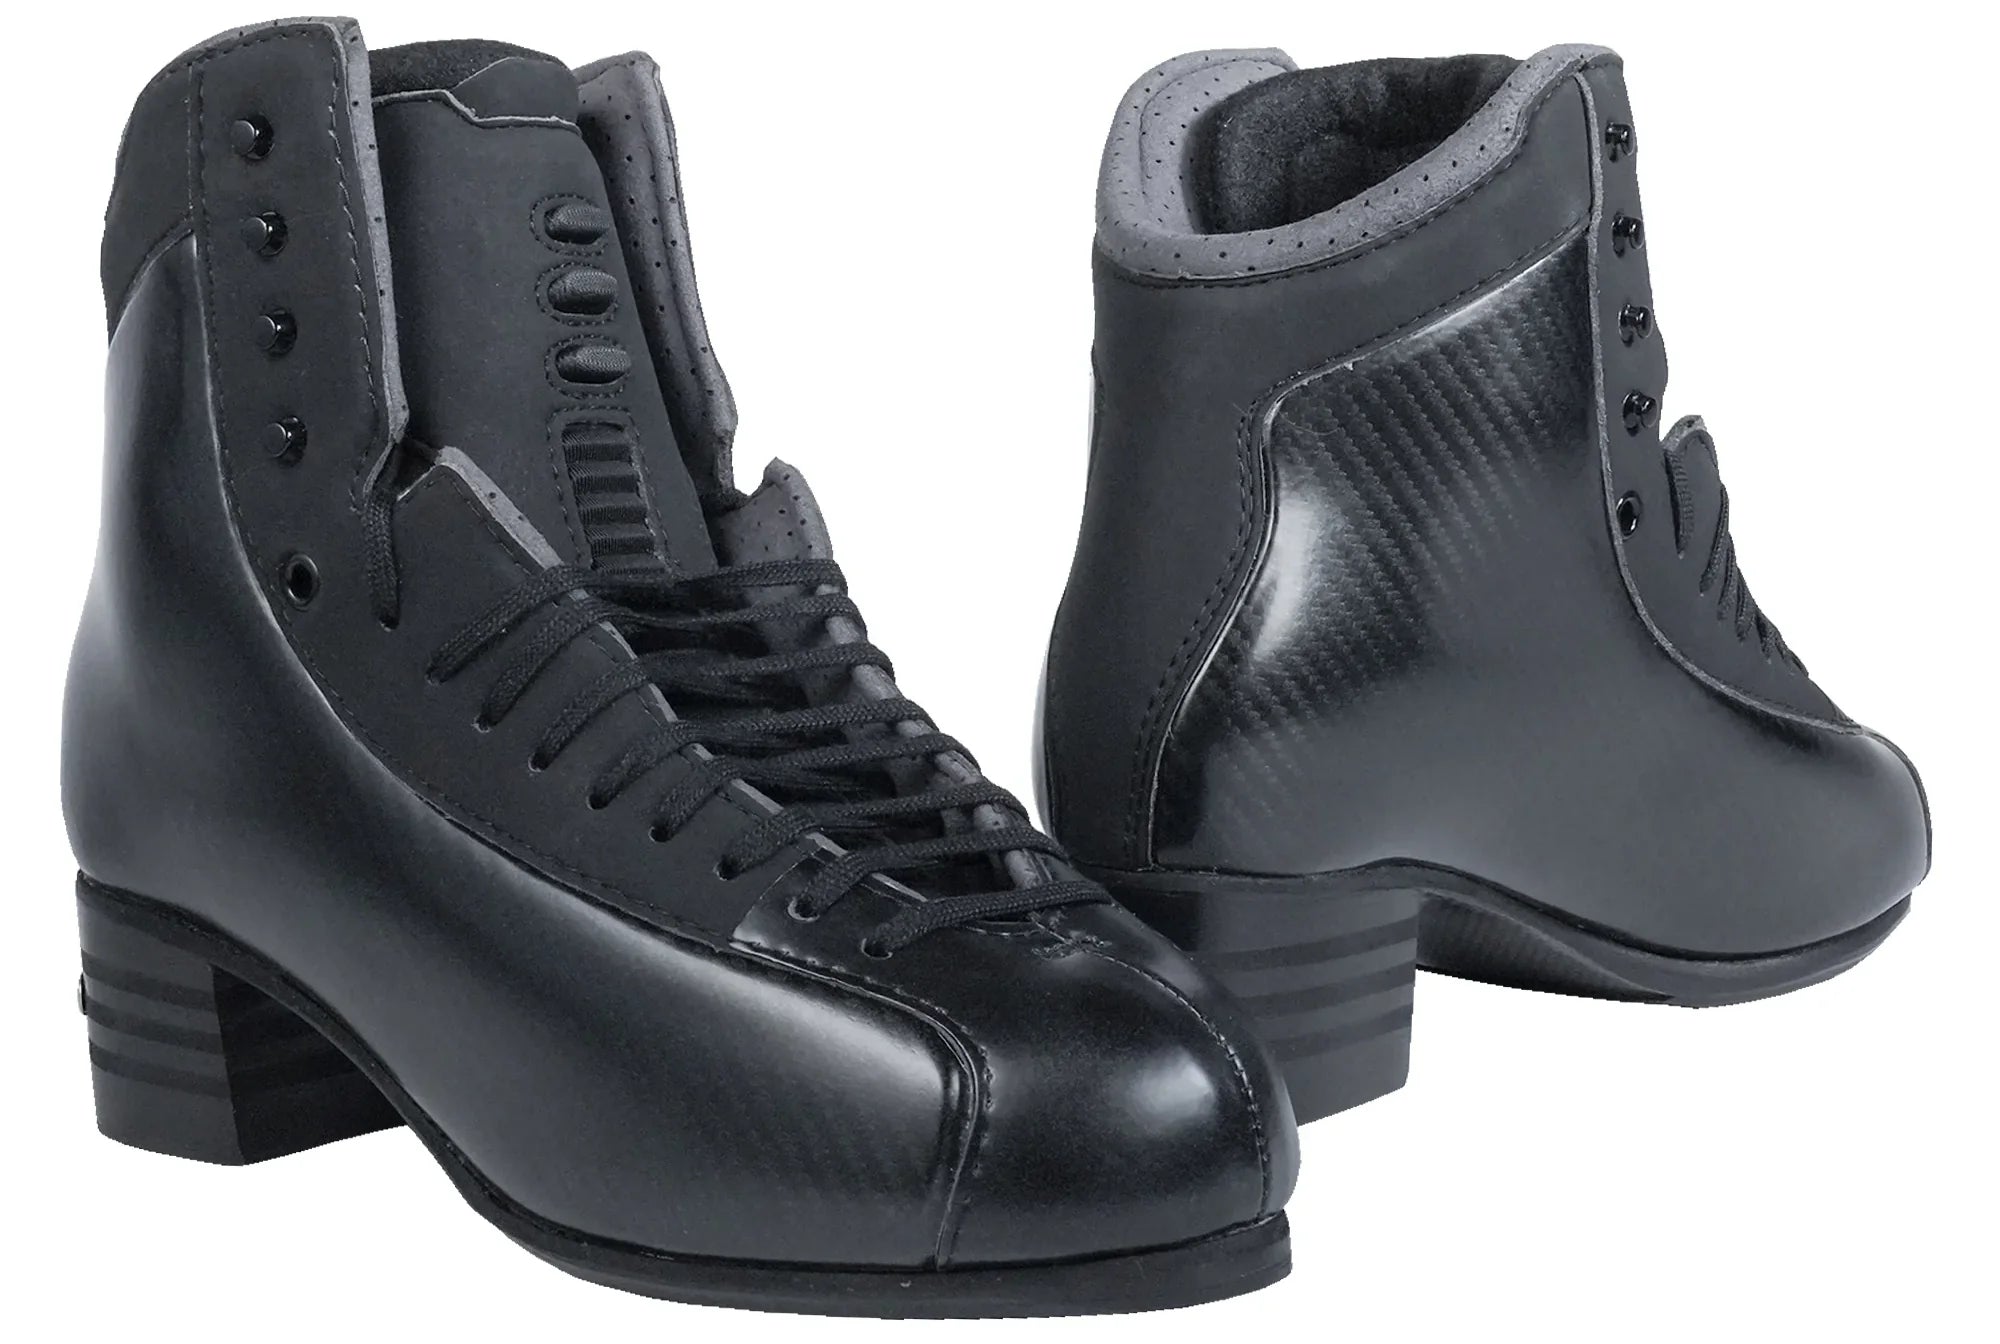 Jackson Synergy Pro 6285 Boot Only in Black